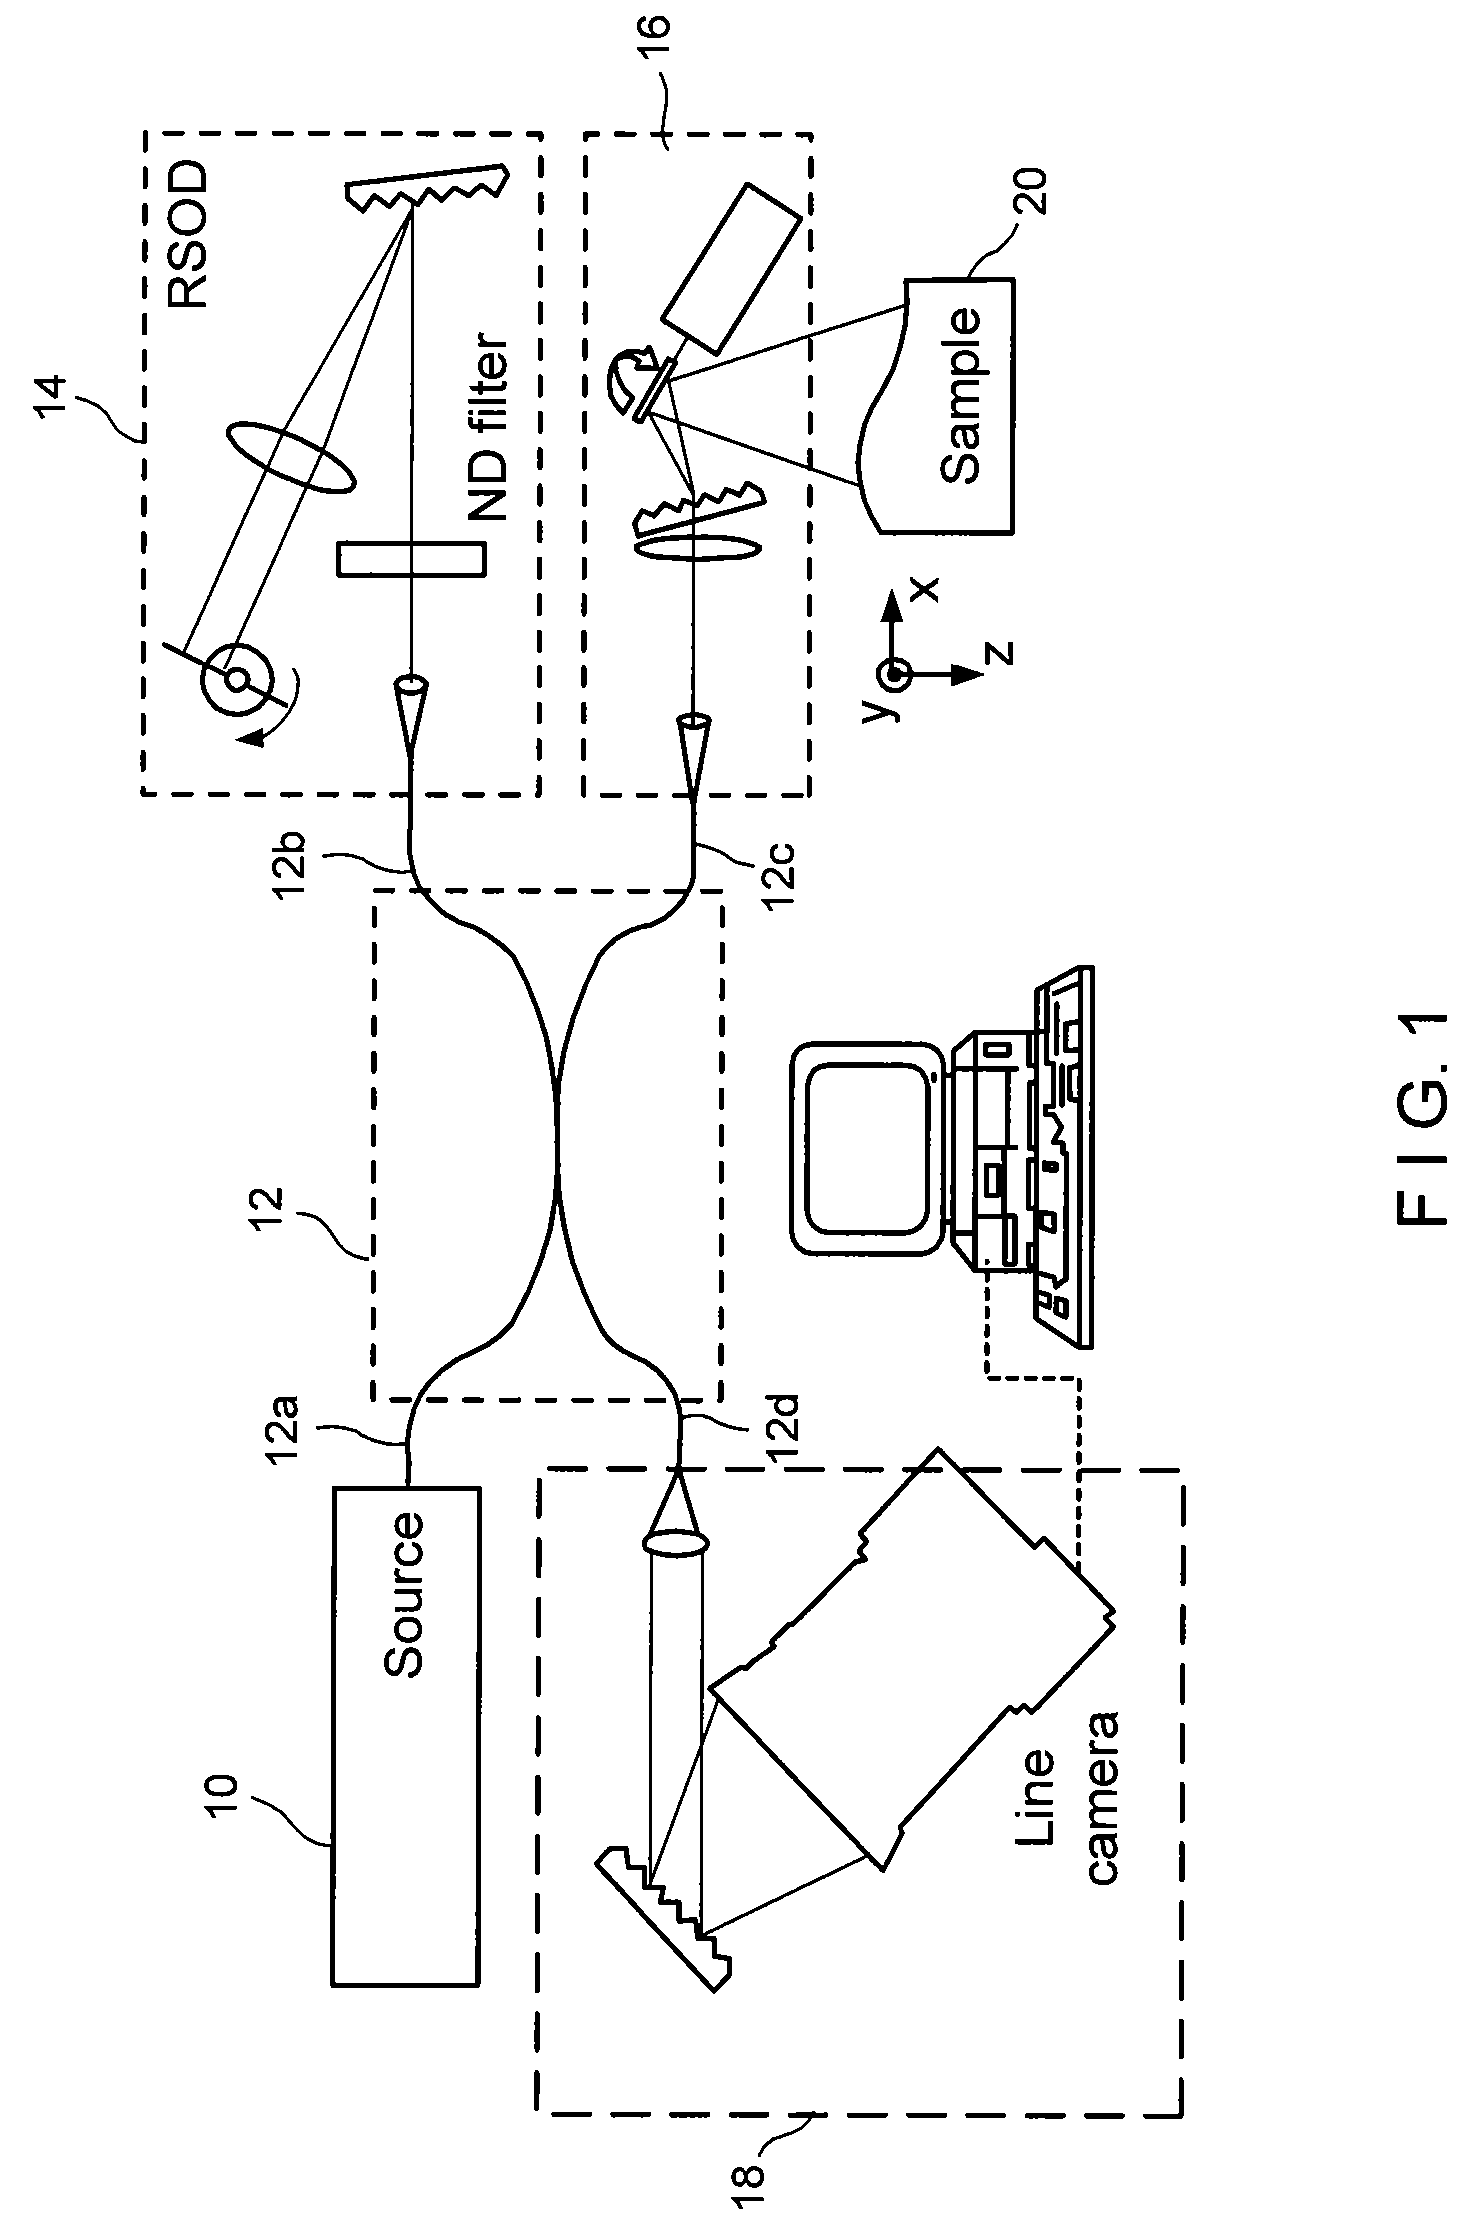 Systems and methods for generating data based on one or more spectrally-encoded endoscopy techniques